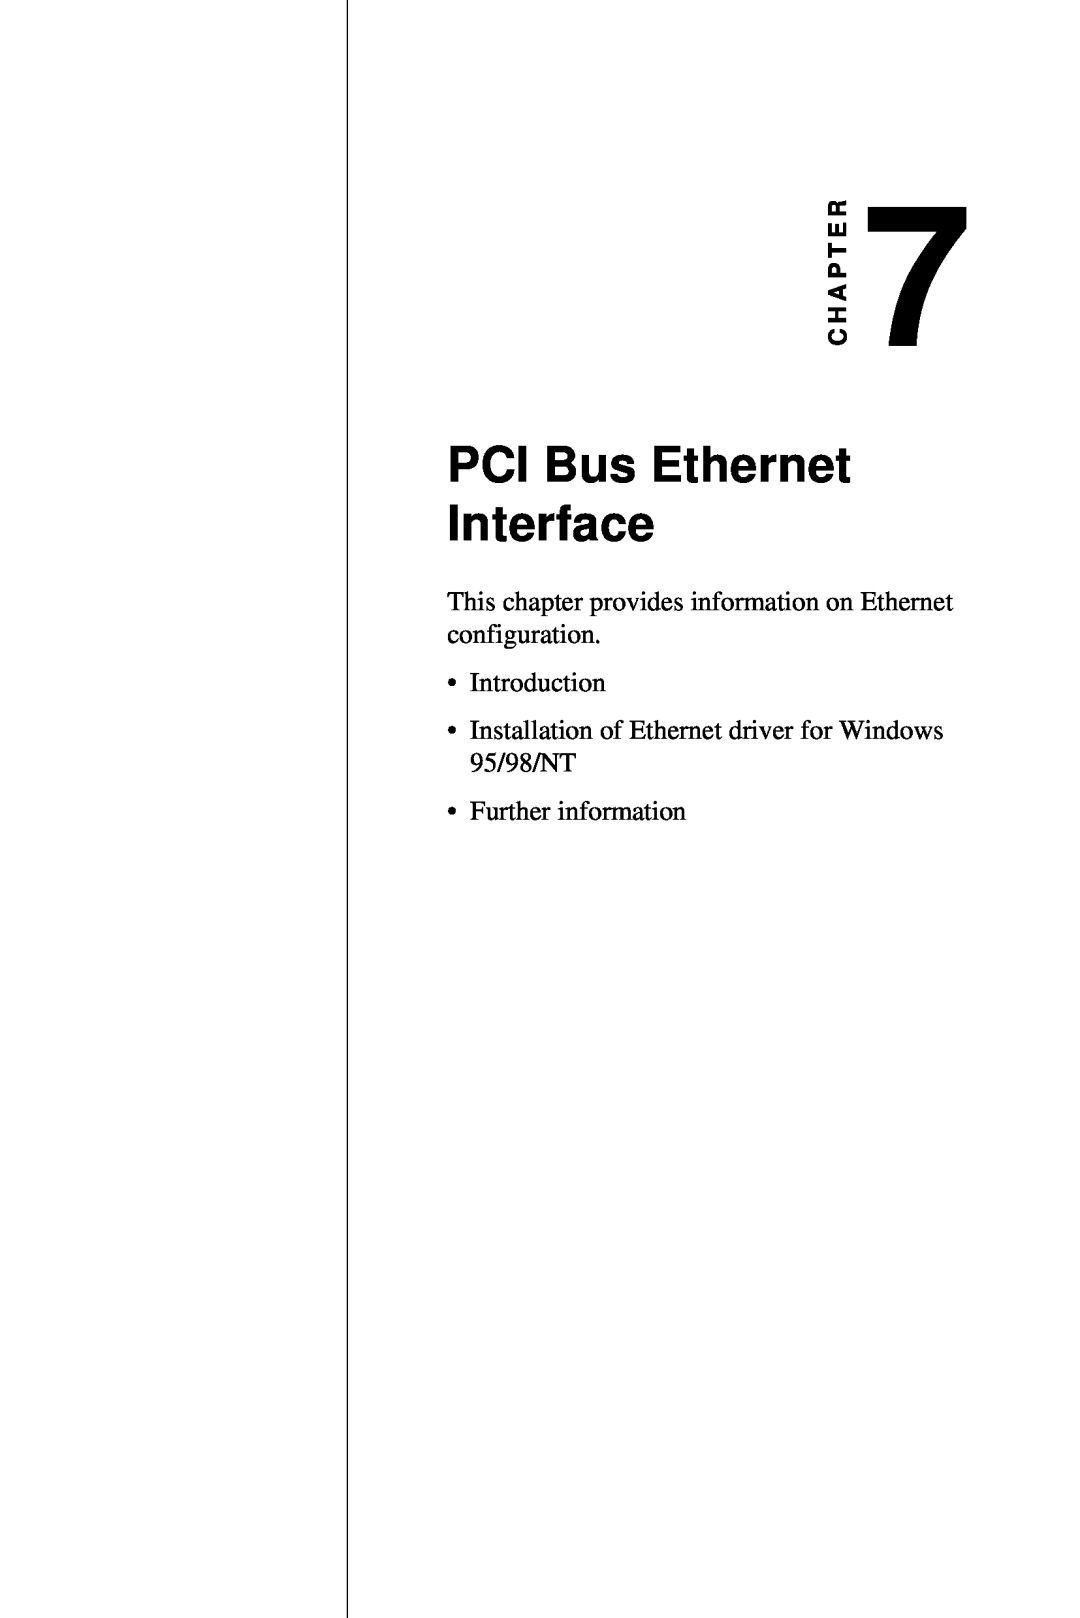 Advantech 2006957006 5th Edition PCI Bus Ethernet Interface, This chapter provides information on Ethernet configuration 